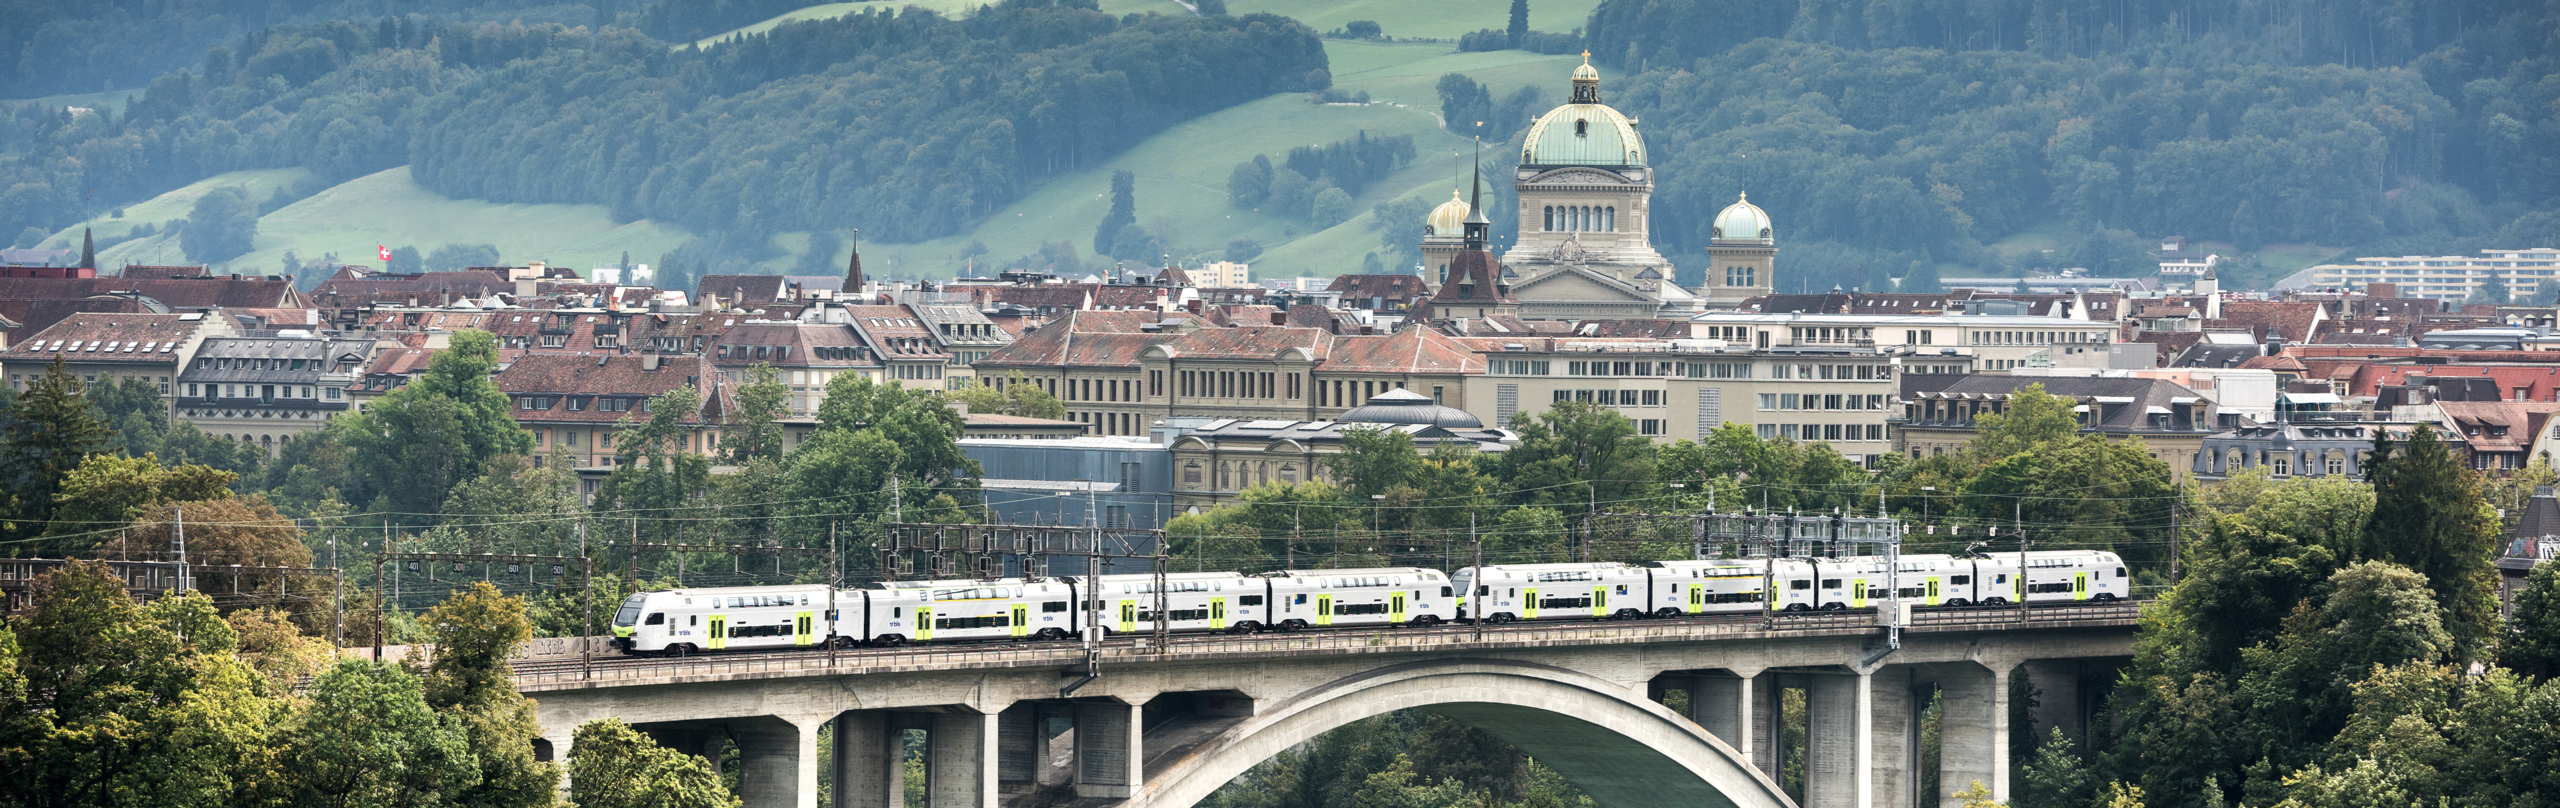 Train with the city of Bern in the background